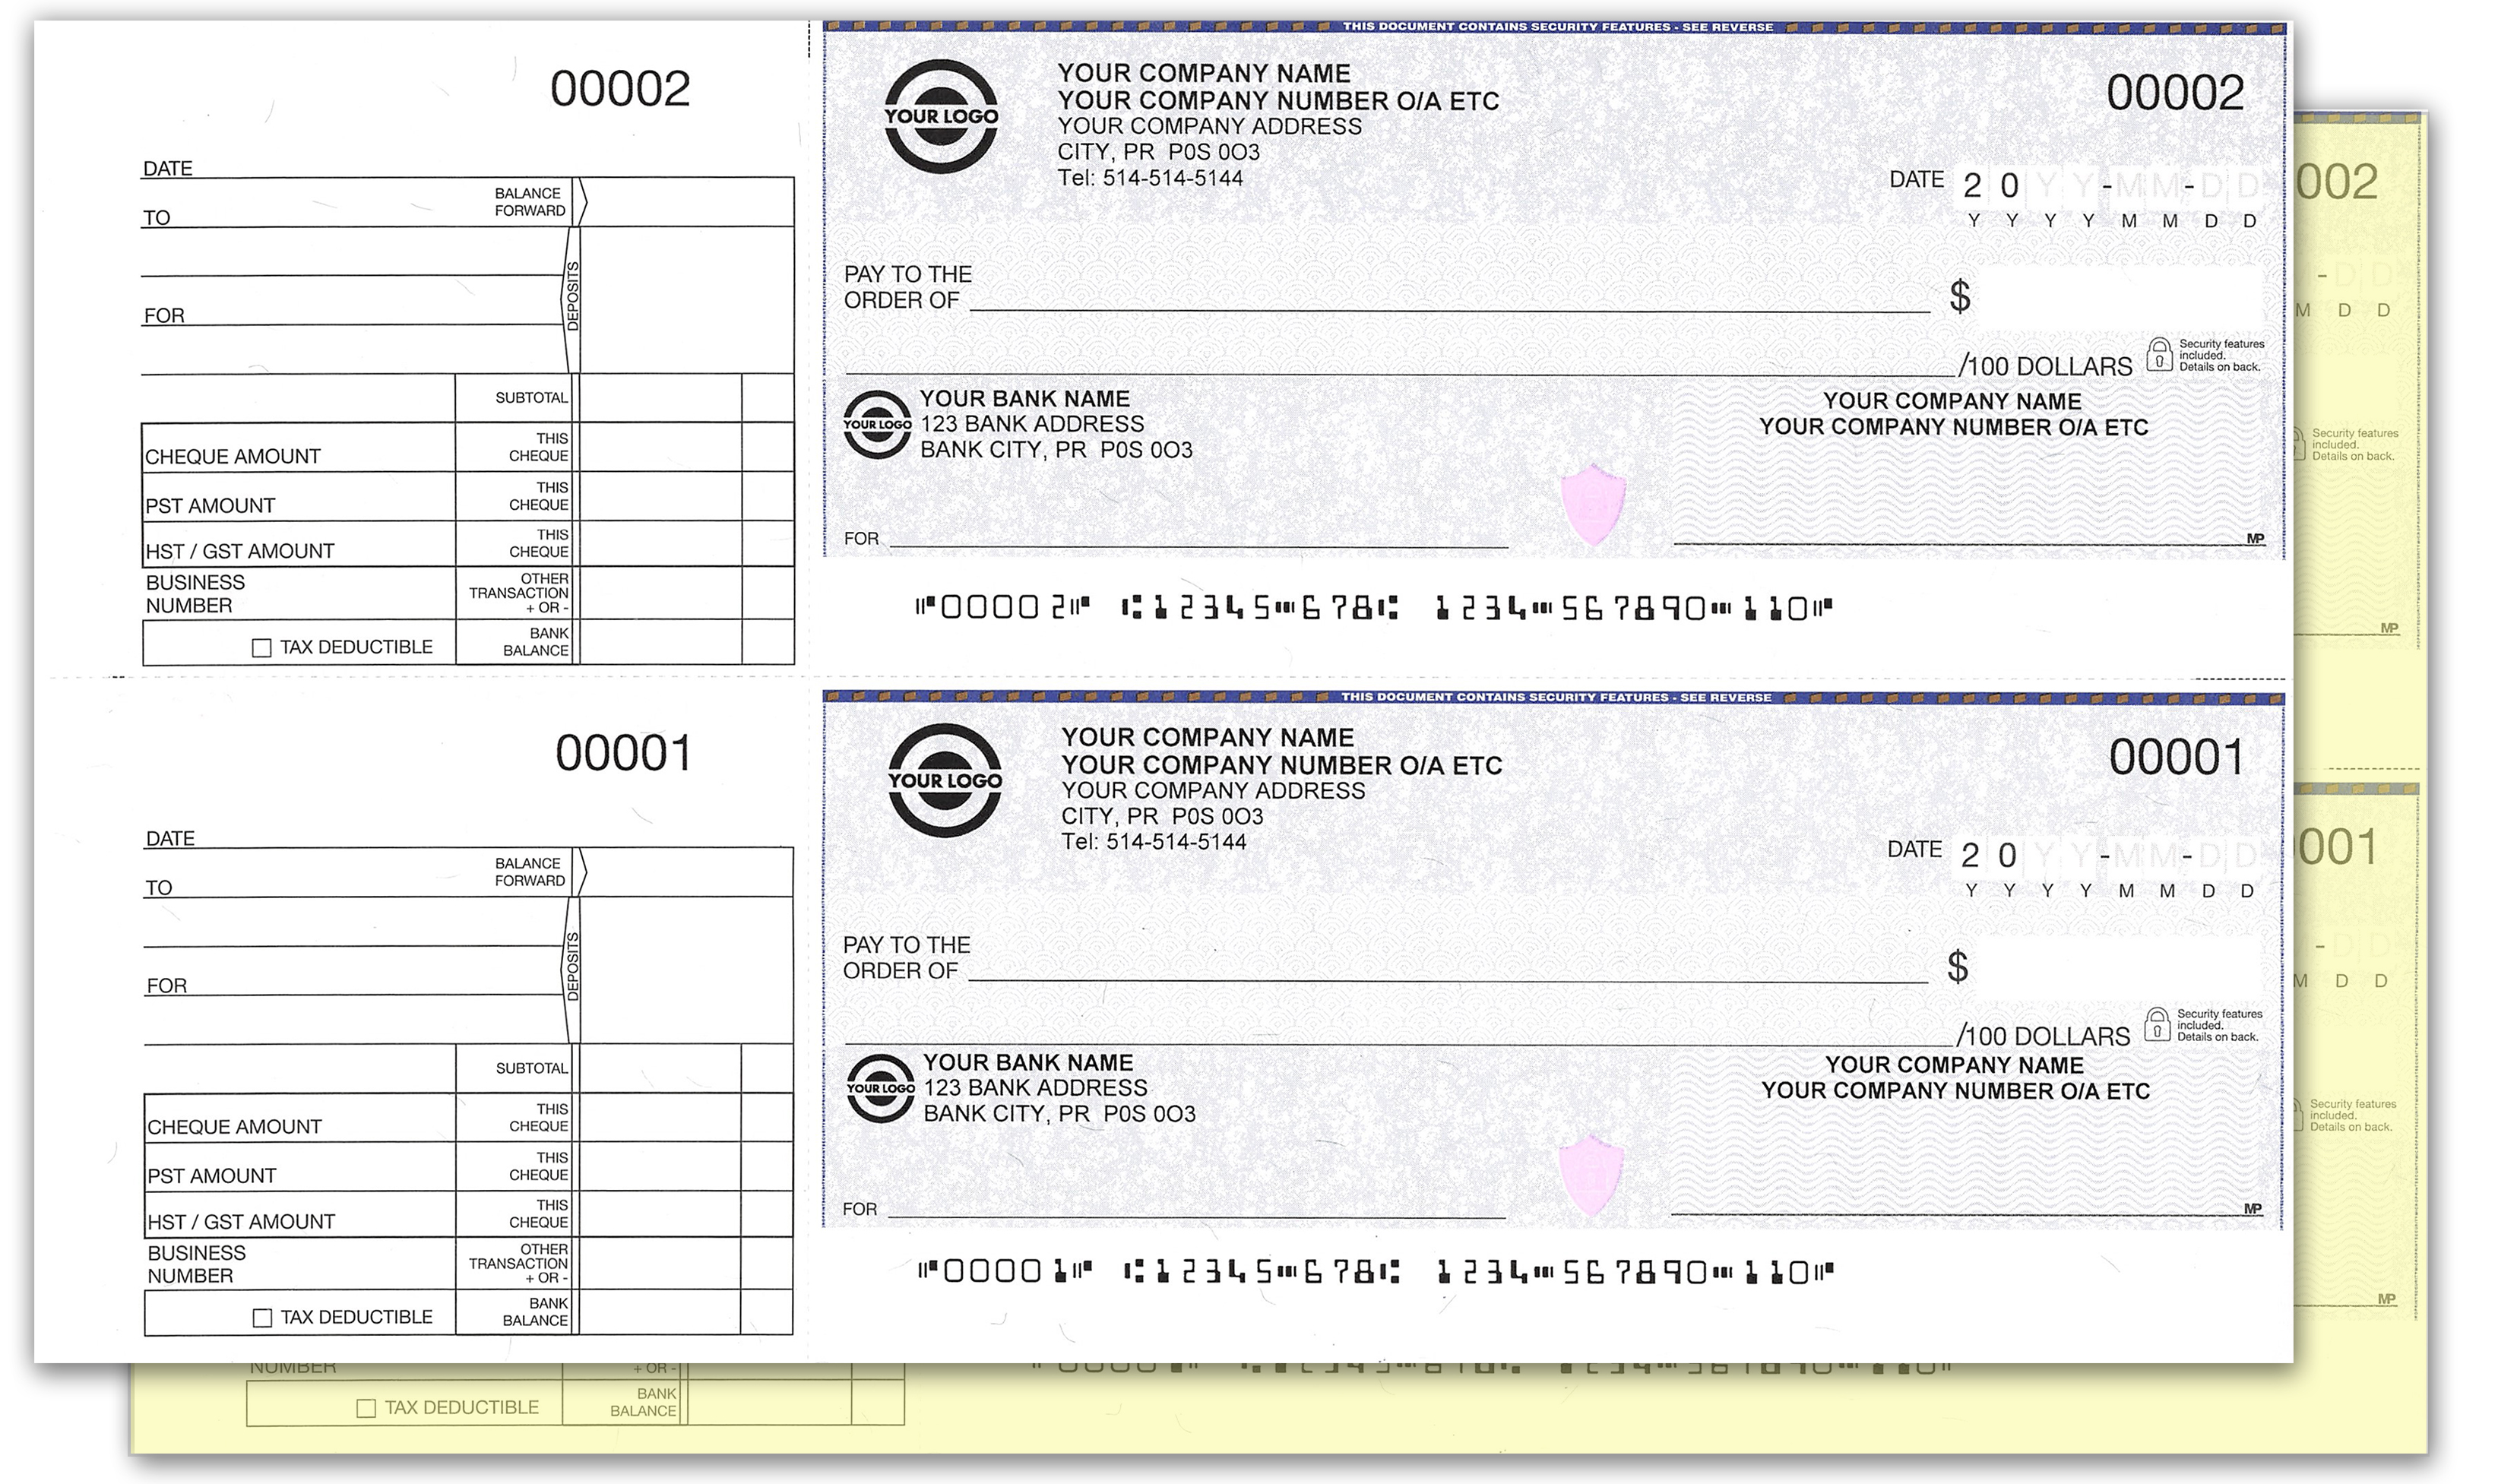 2 (carbon) Copy High Security Manual Cheques